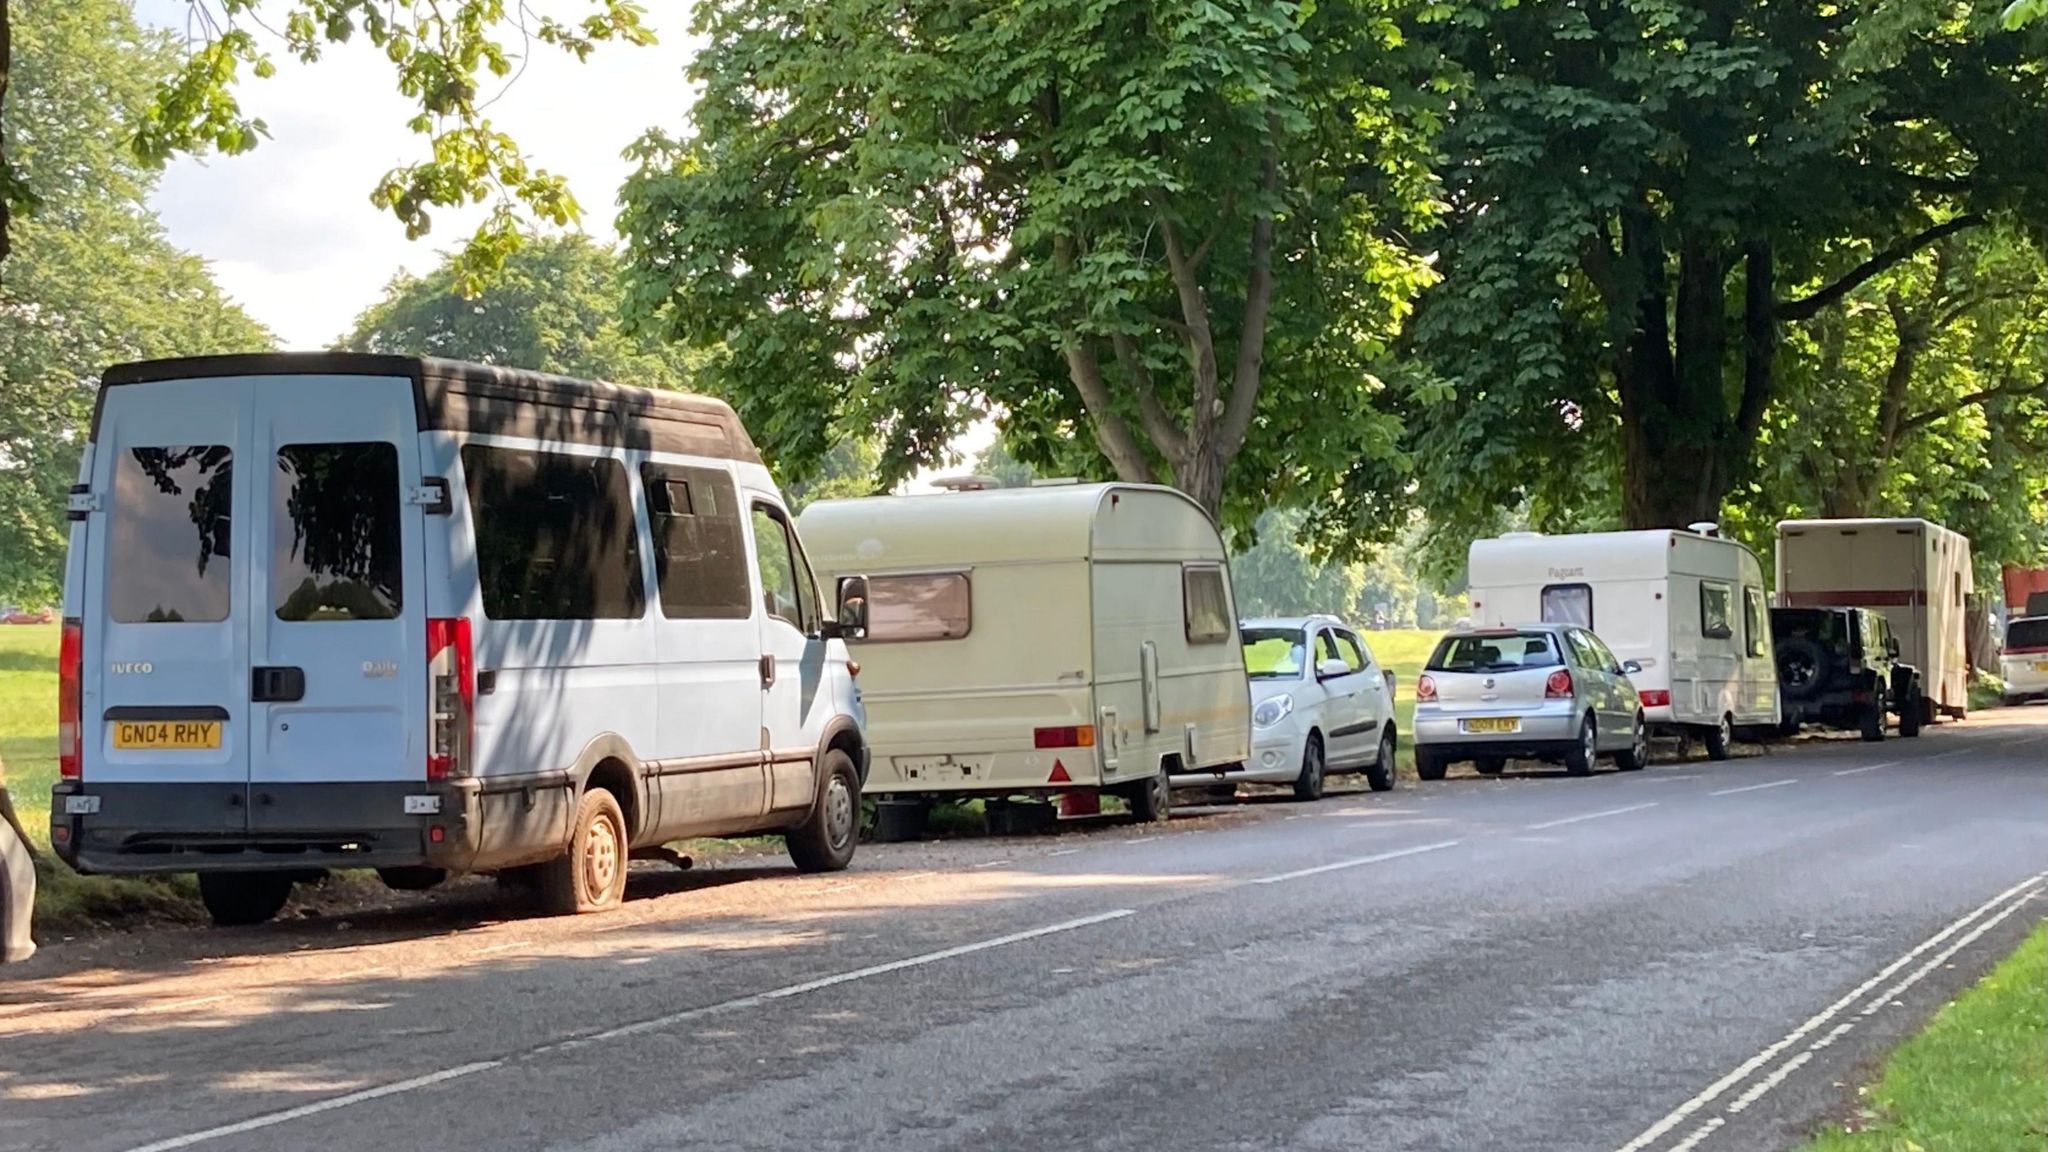 Vans parked by the Downs in Bristol